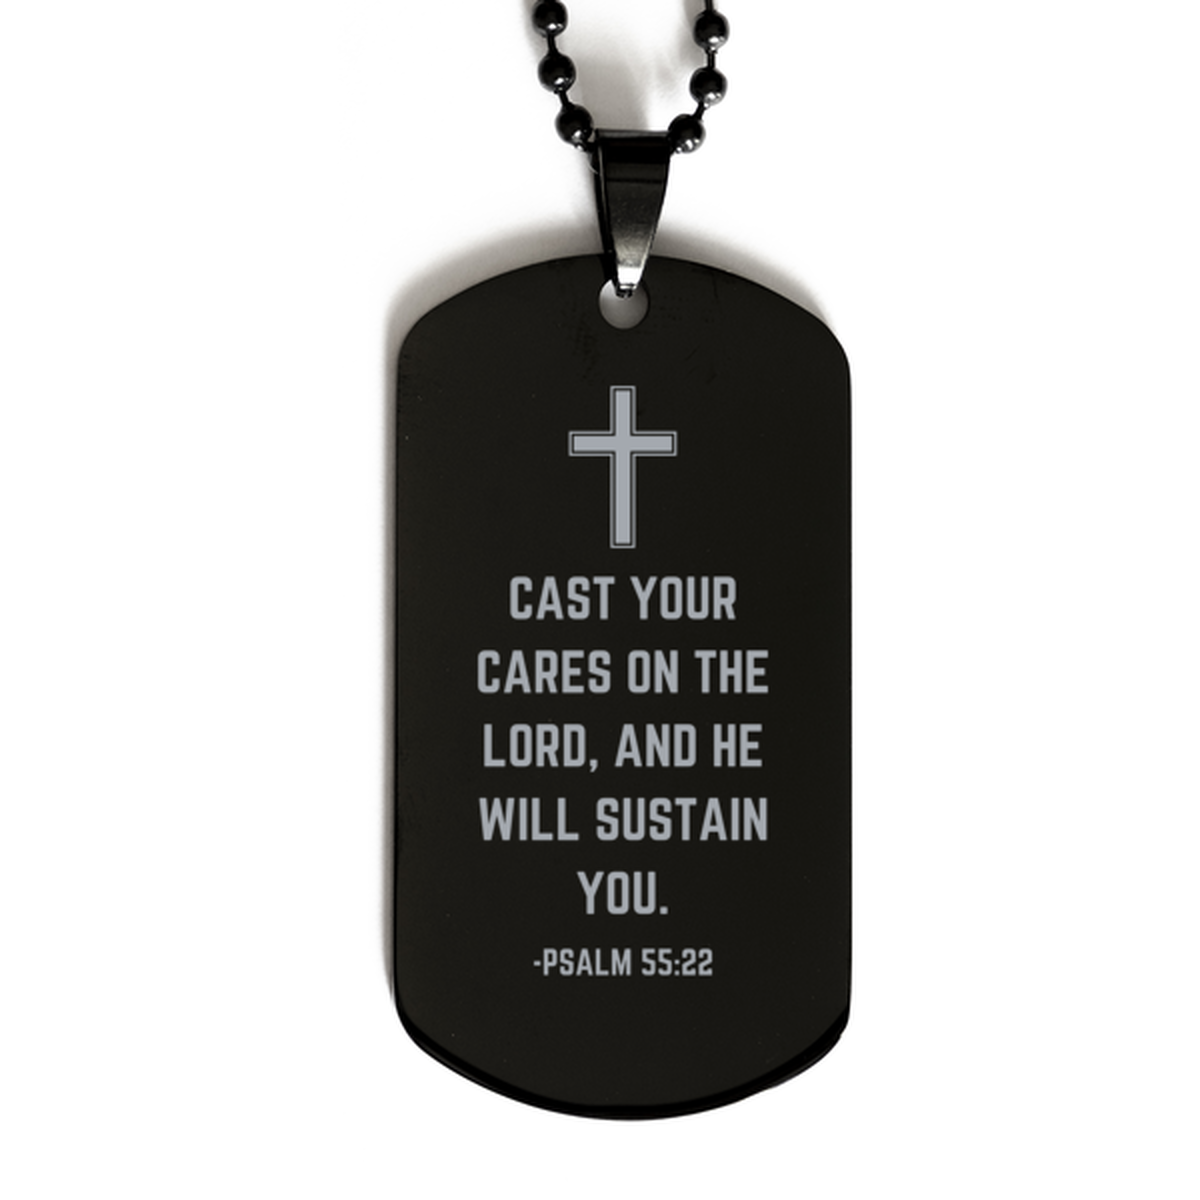 Baptism Gifts For Teenage Boys Girls, Christian Bible Verse Black Dog Tag, Cast your cares on the Lord, Confirmation Gifts, Bible Verse Necklace for Son, Godson, Grandson, Nephew